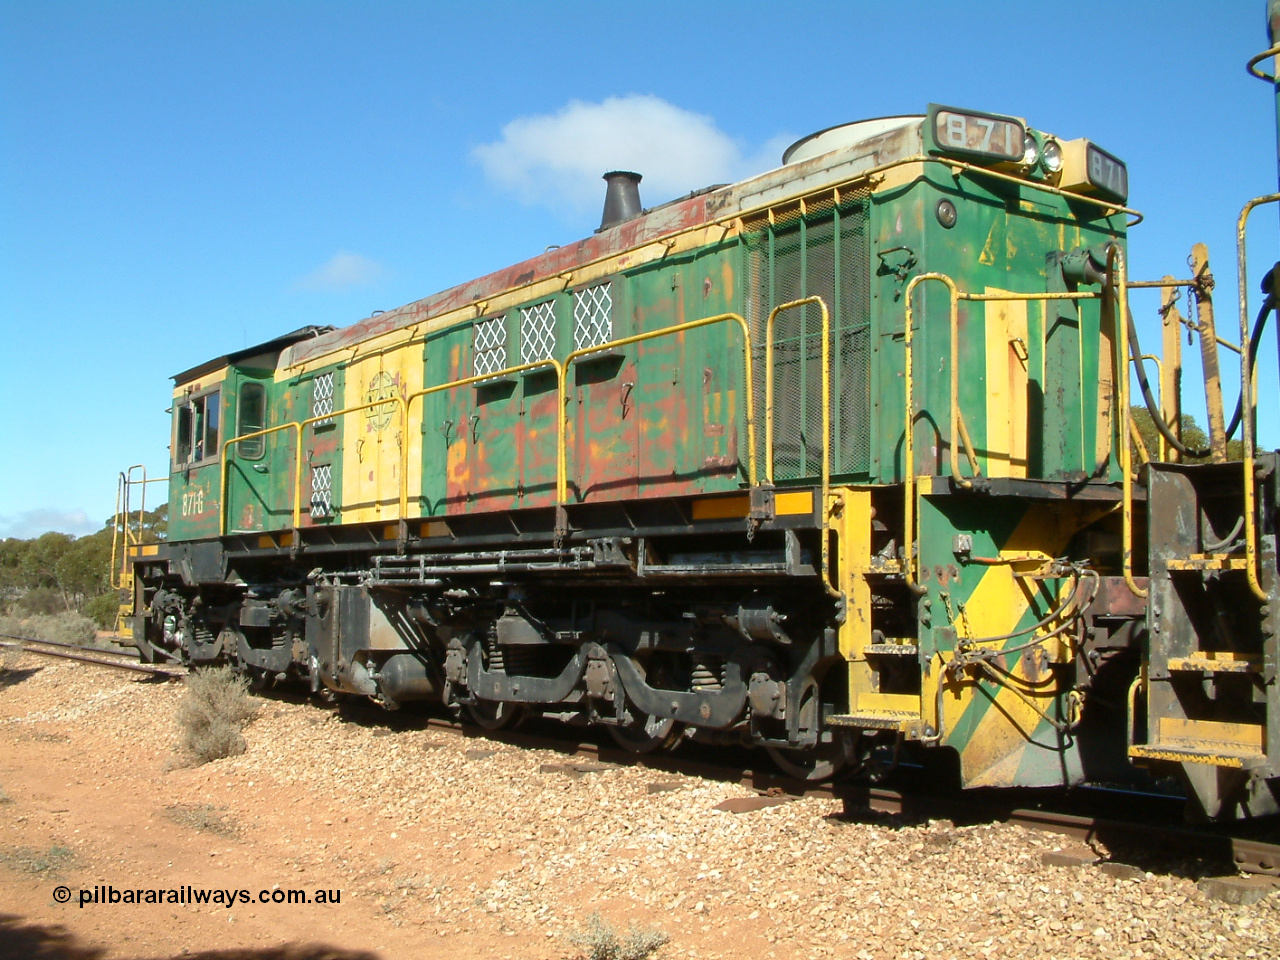 030411 101856
Kimba Grain Bunker, ALCo DL531 model built by AE Goodwin NSW as 830 class 871 issued to Eyre Peninsula from new in February 1966, trailing view, 11th April 2003. [url=https://goo.gl/maps/Et8bgaqpMnn]Geodata here[/url].
Keywords: 830-class;871;G3422-1;AE-Goodwin;ALCo;DL531;